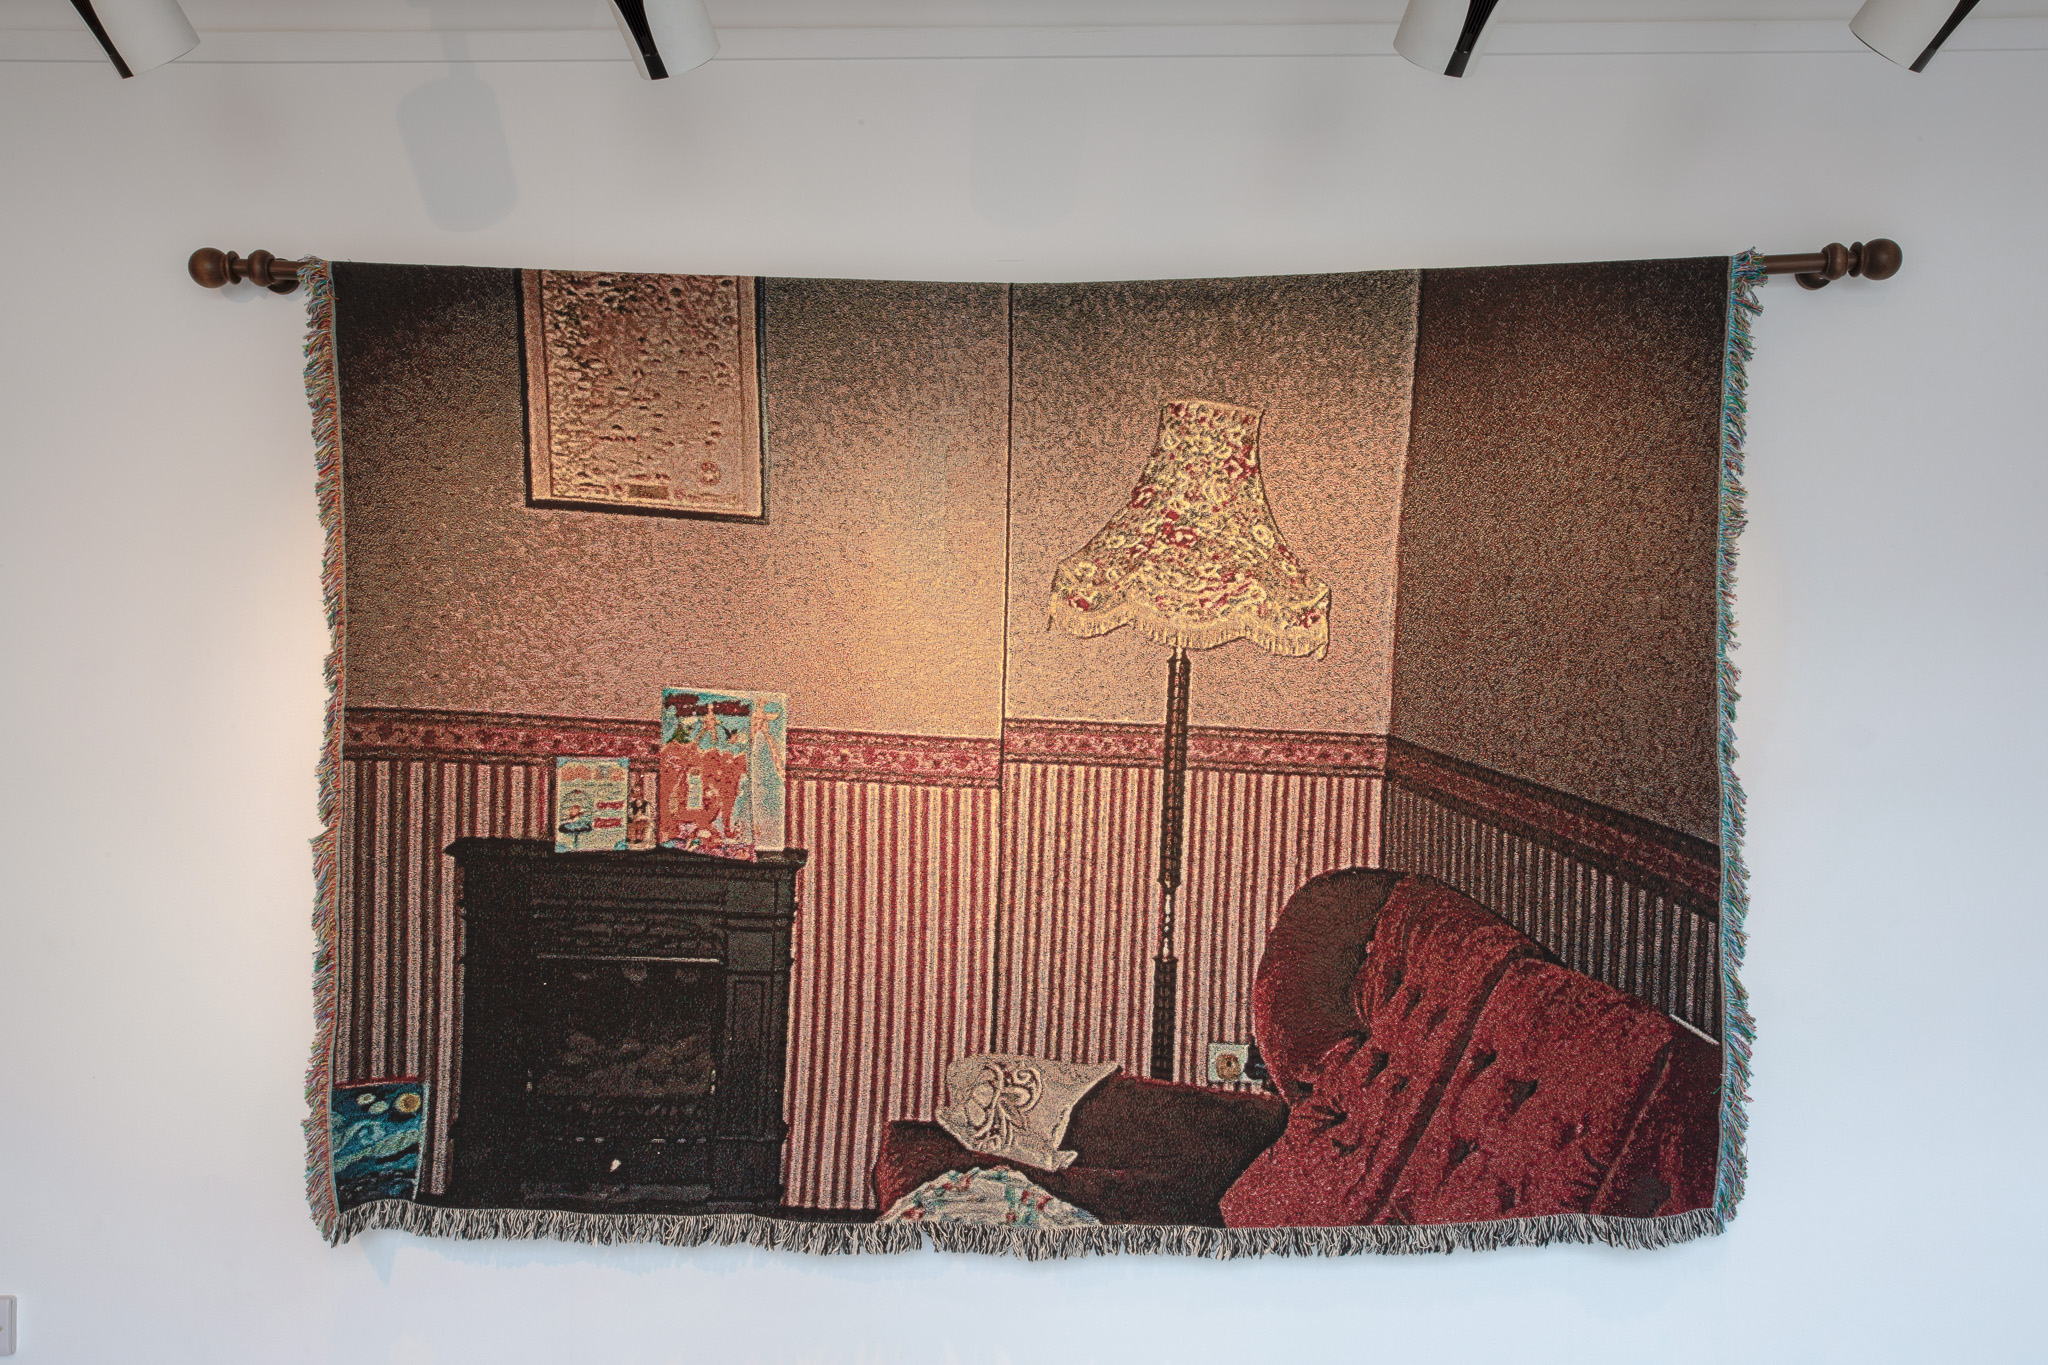 Michelle Malone	
'The Living room, 26 Cloonlara Crescent,' 2022, 
Digitally woven tapestries using Jaquard loom technologies, 213.5 x 145cm 
Images depicted are from Malone family archive.
